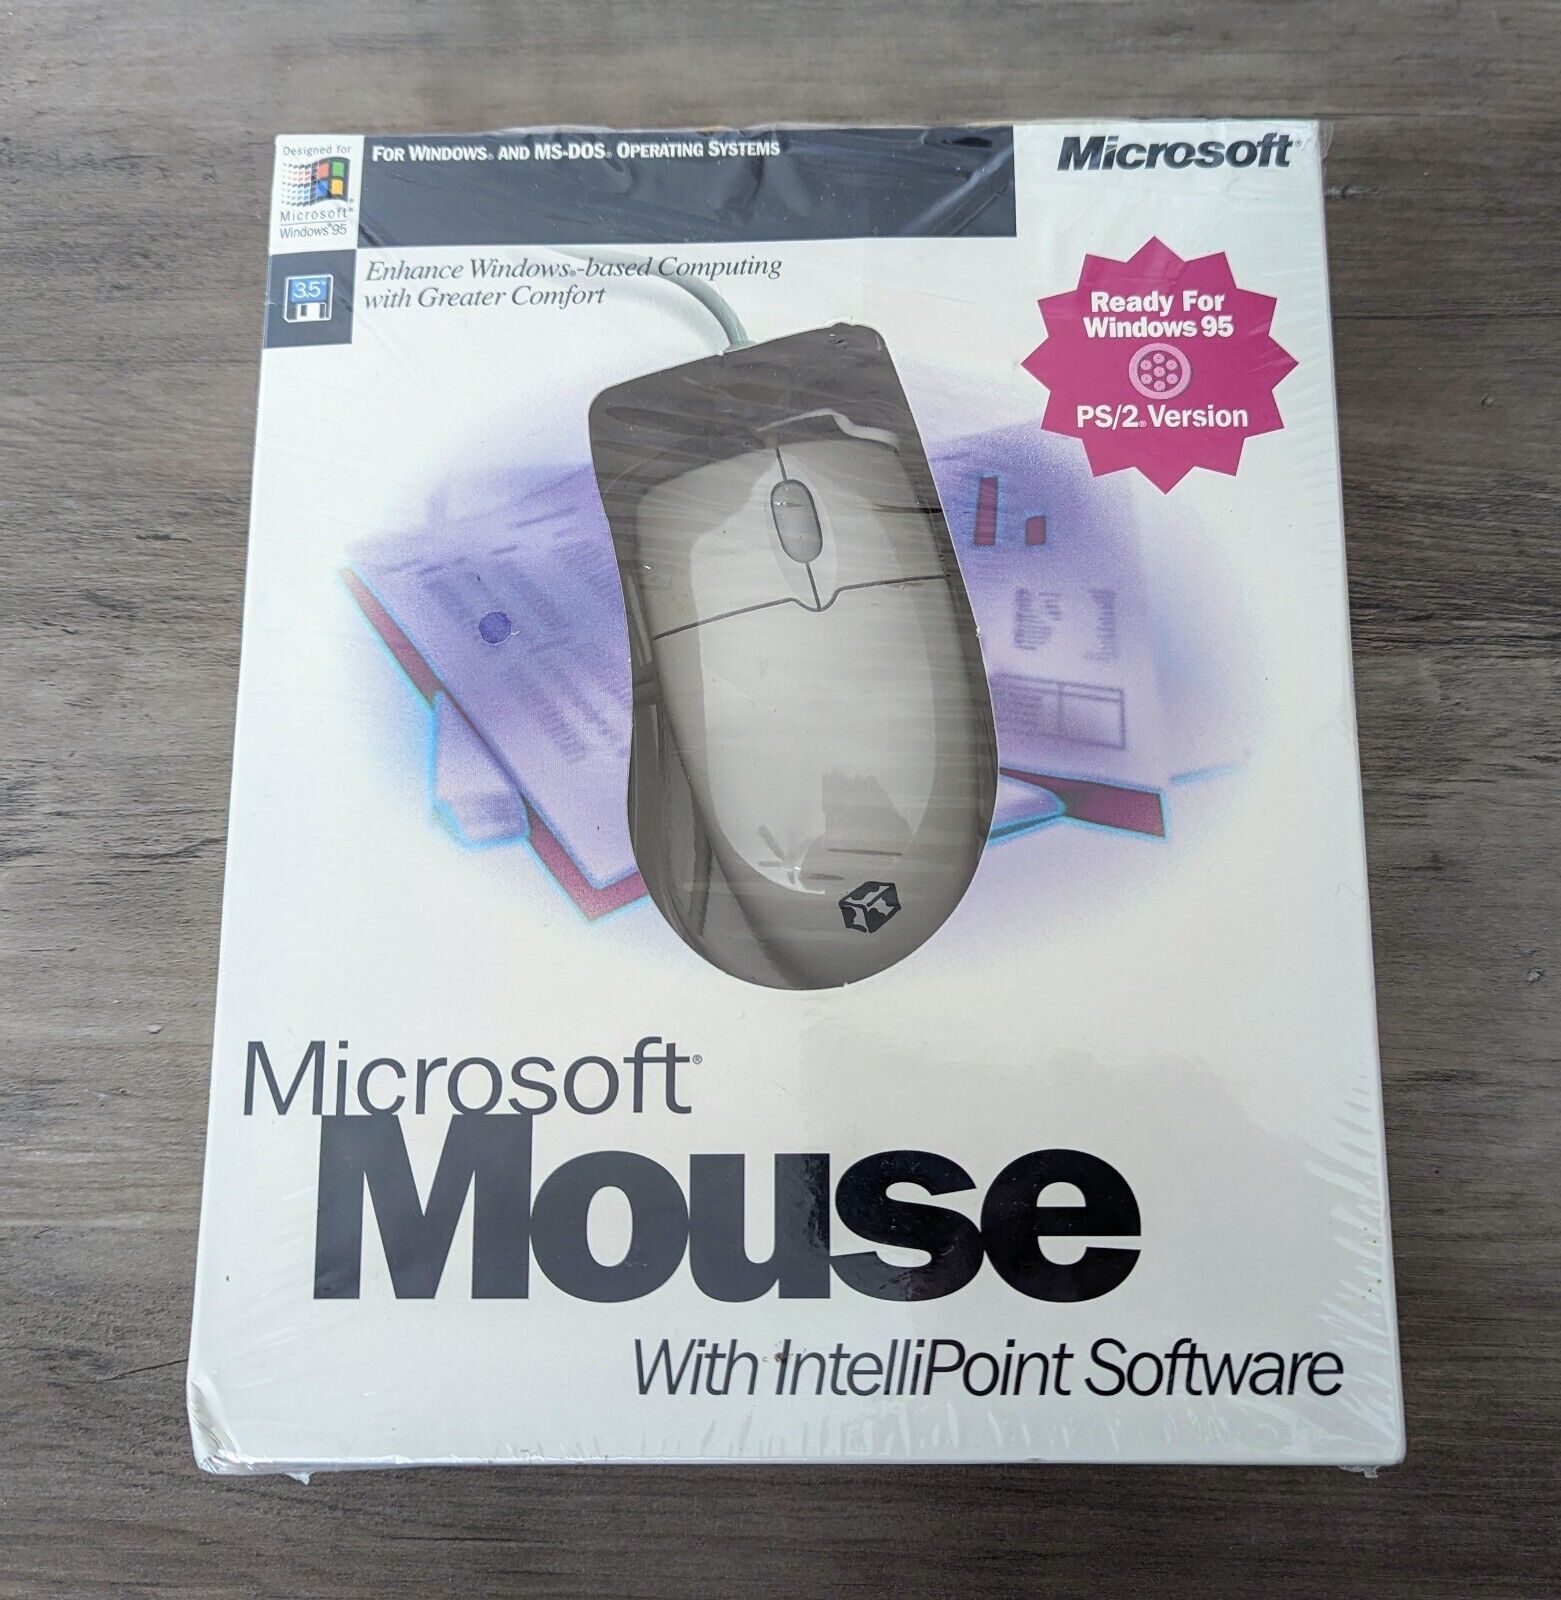 Vintage Microsoft Mouse 2.0 (Serial) with IntelliPoint New Software Opened Box